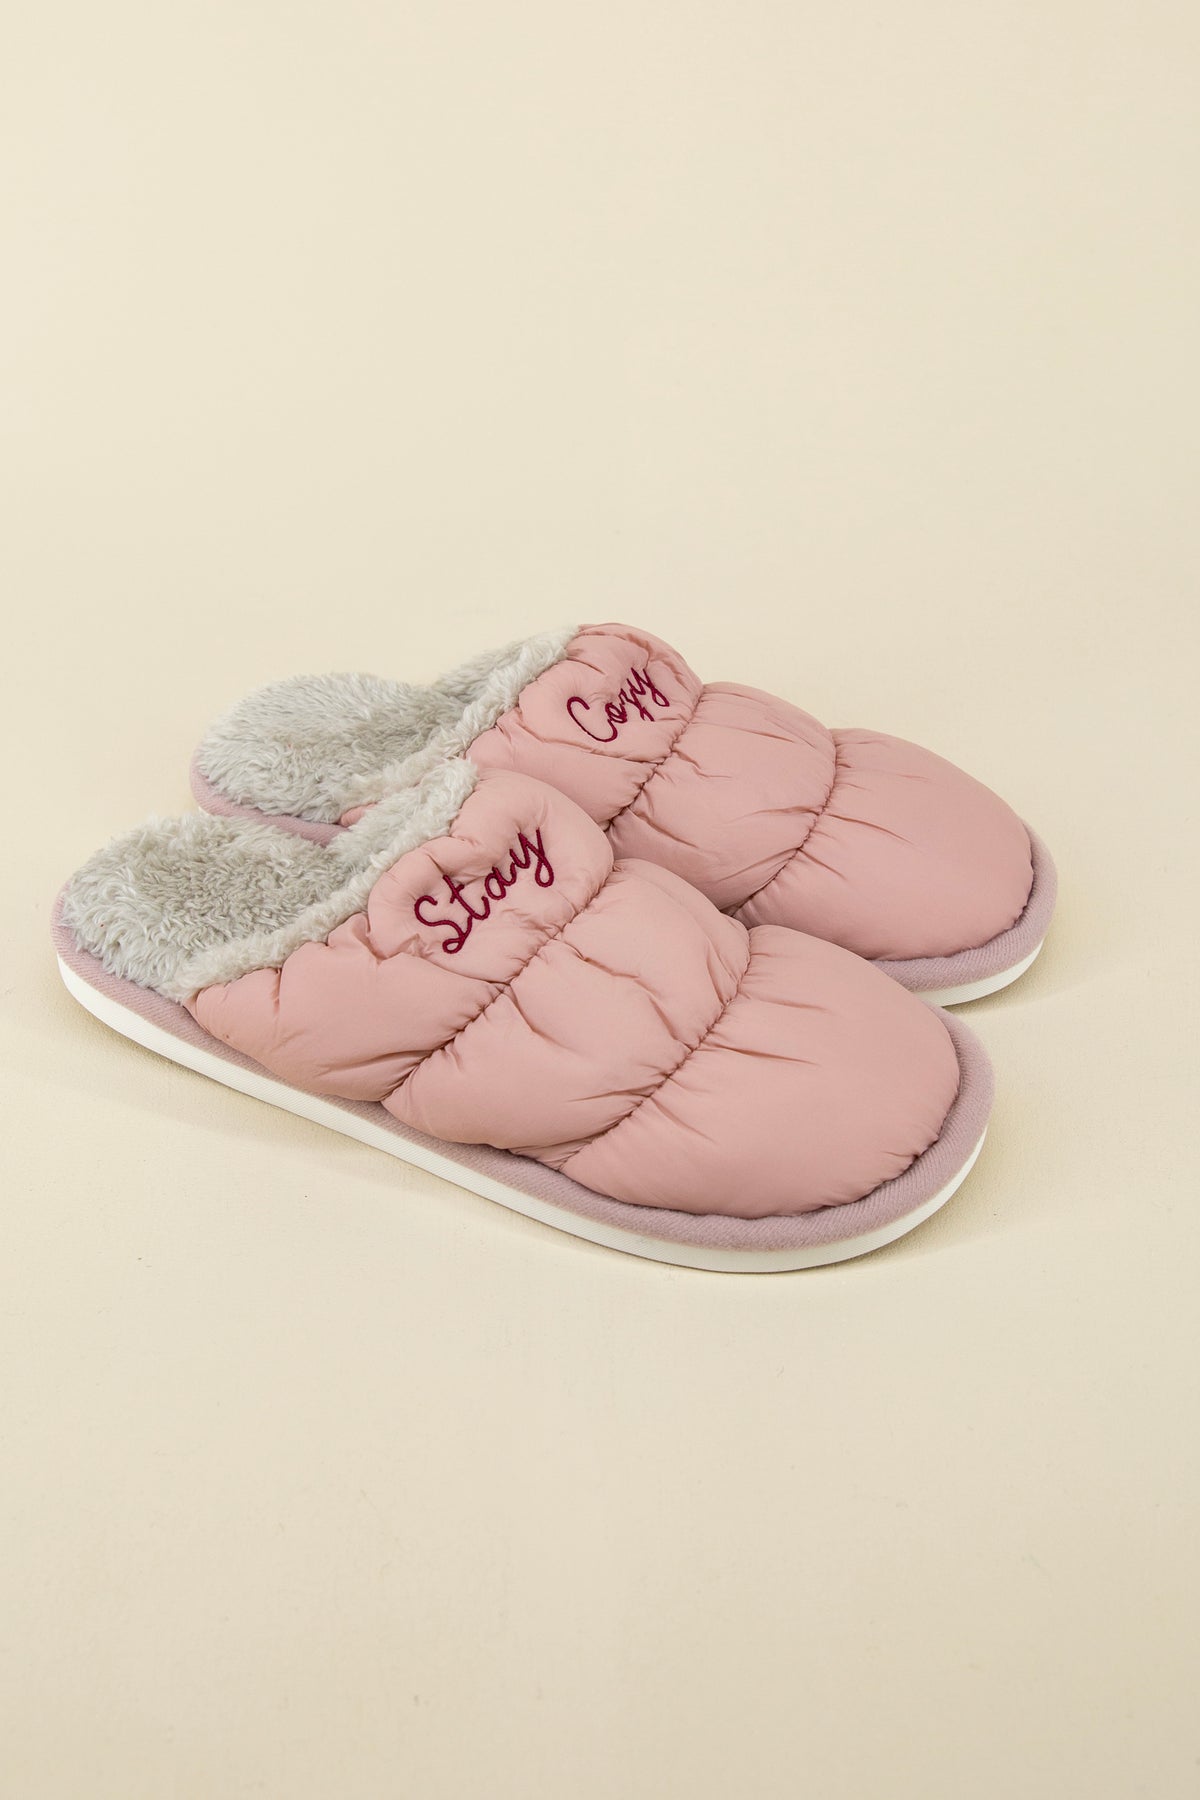 cozy slippers, pink